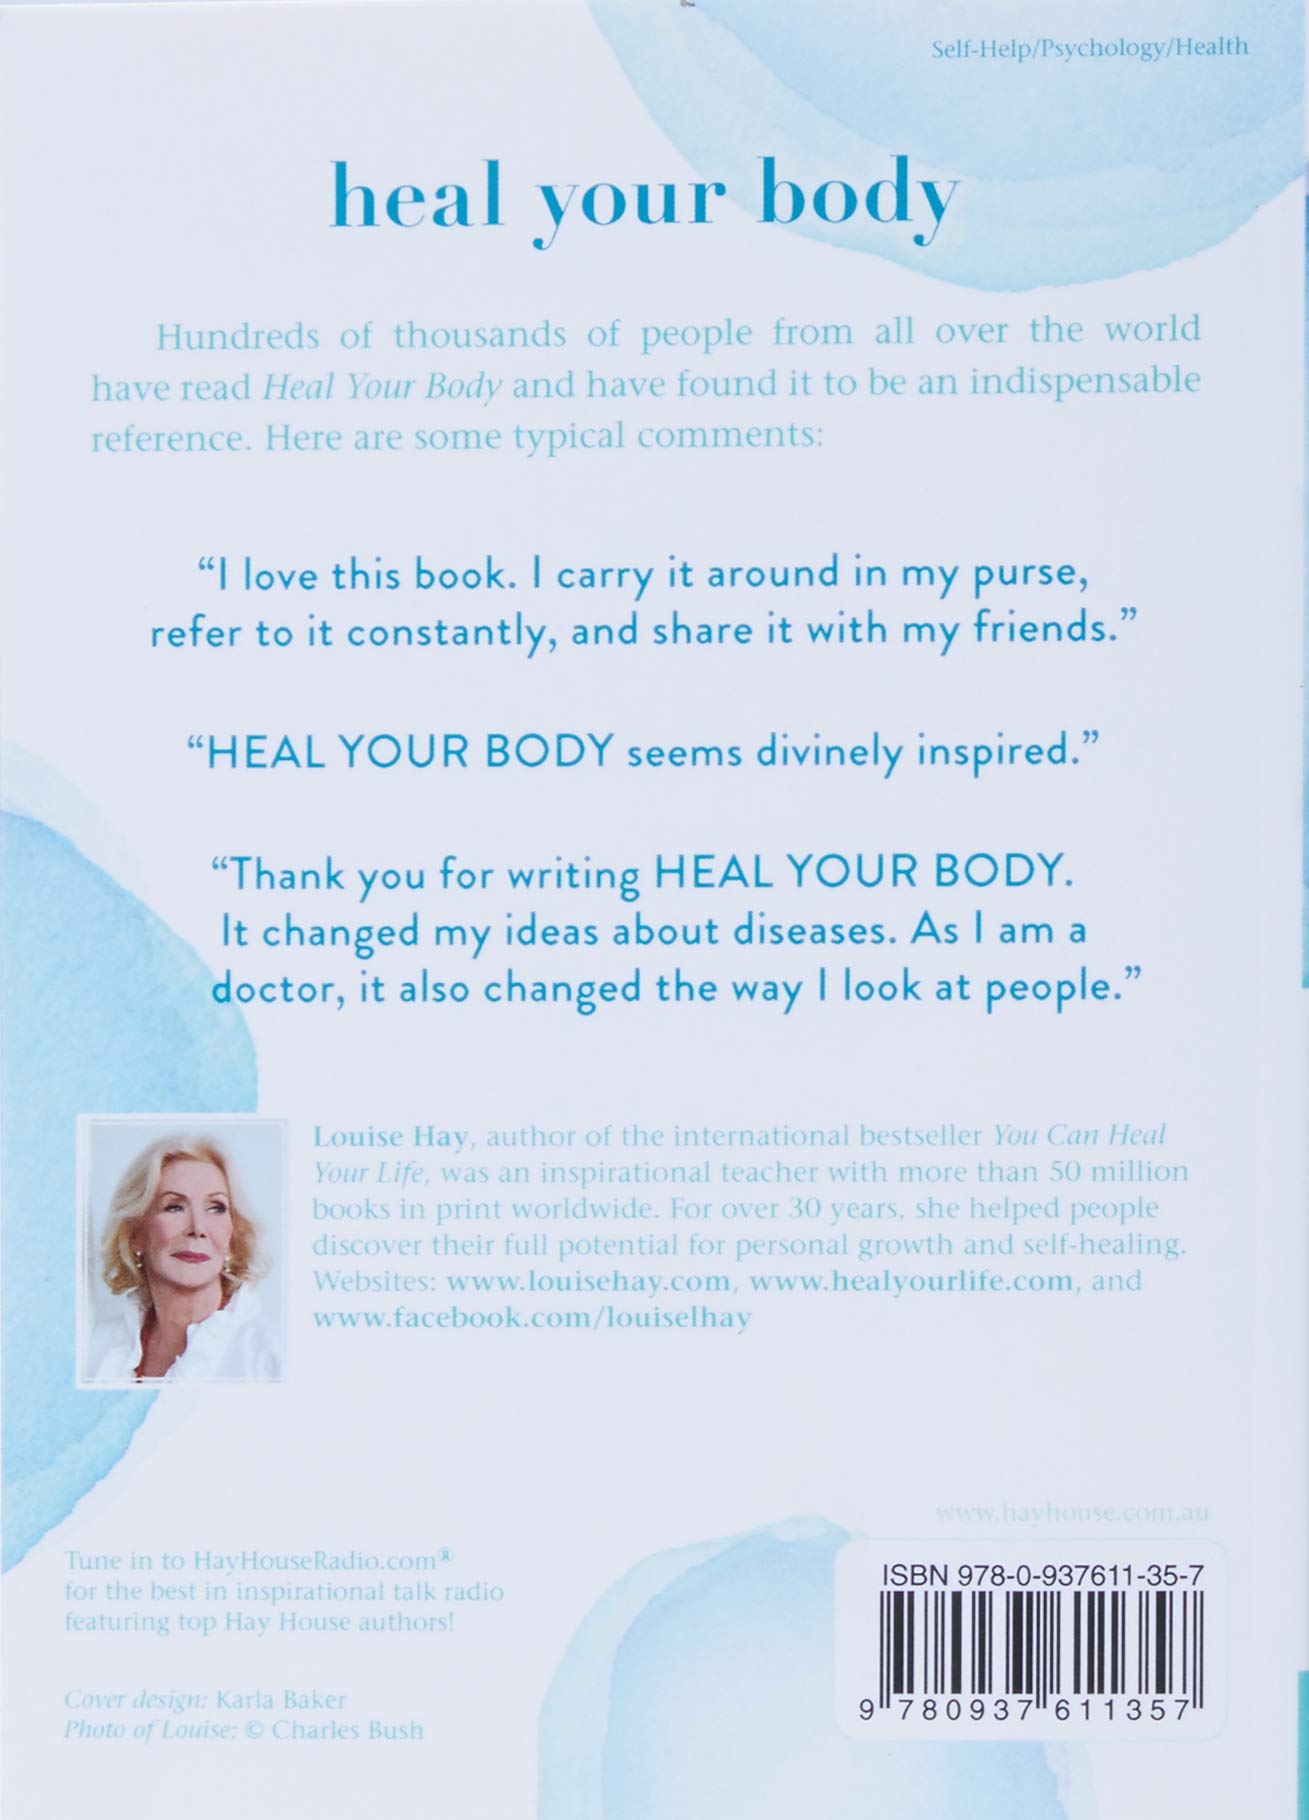 You Can Heal Your Life by Louise Hay, Paperback